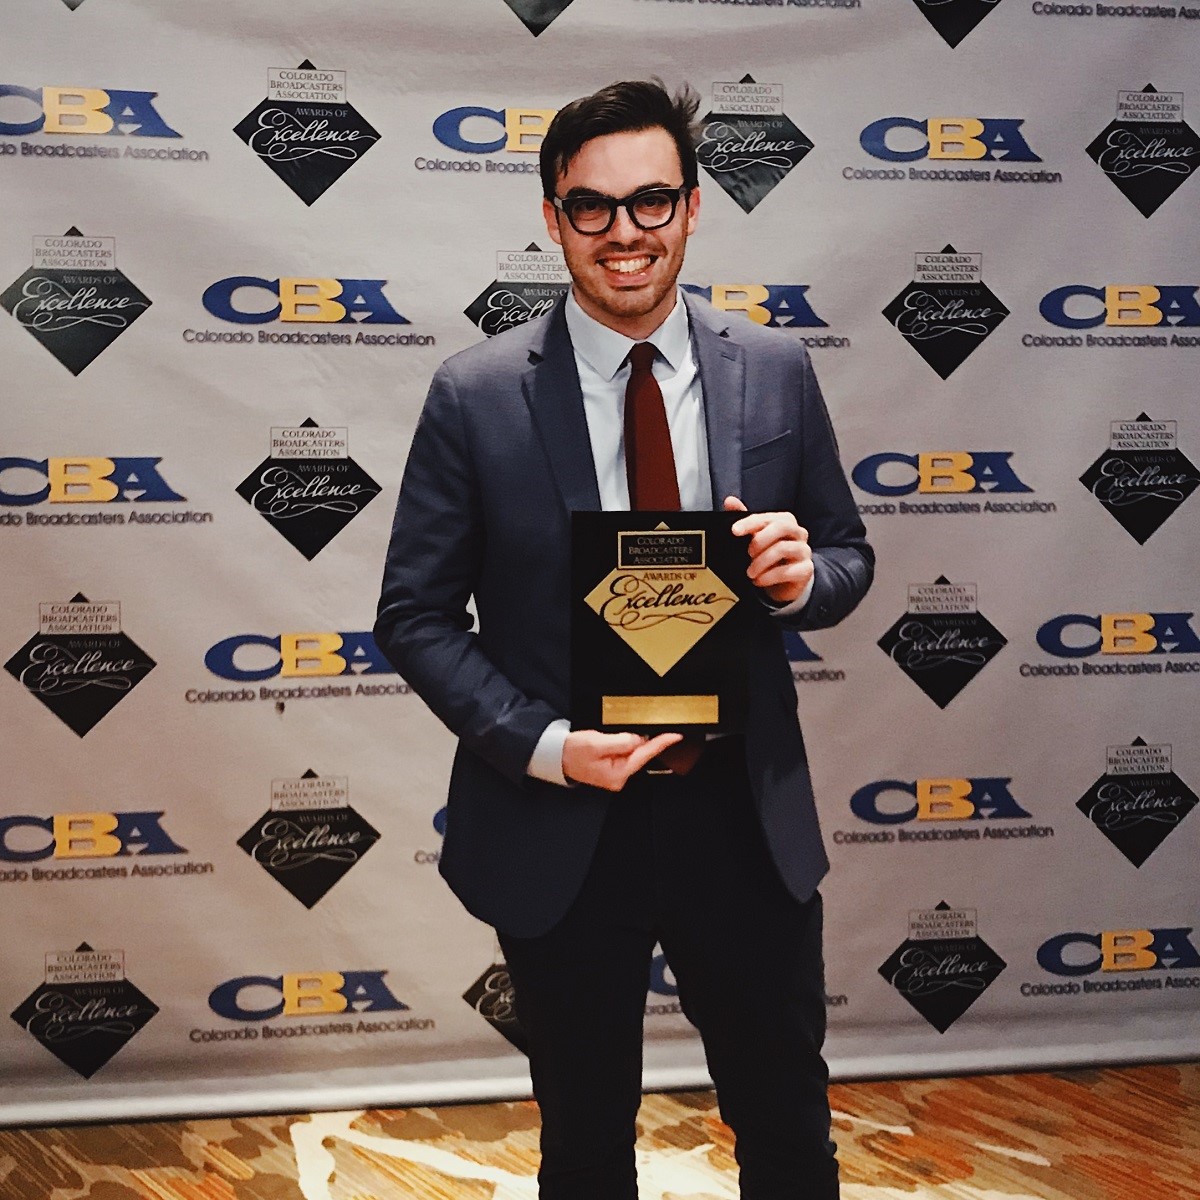 Jake Brownell ’12 Wins CBA Award of Excellence